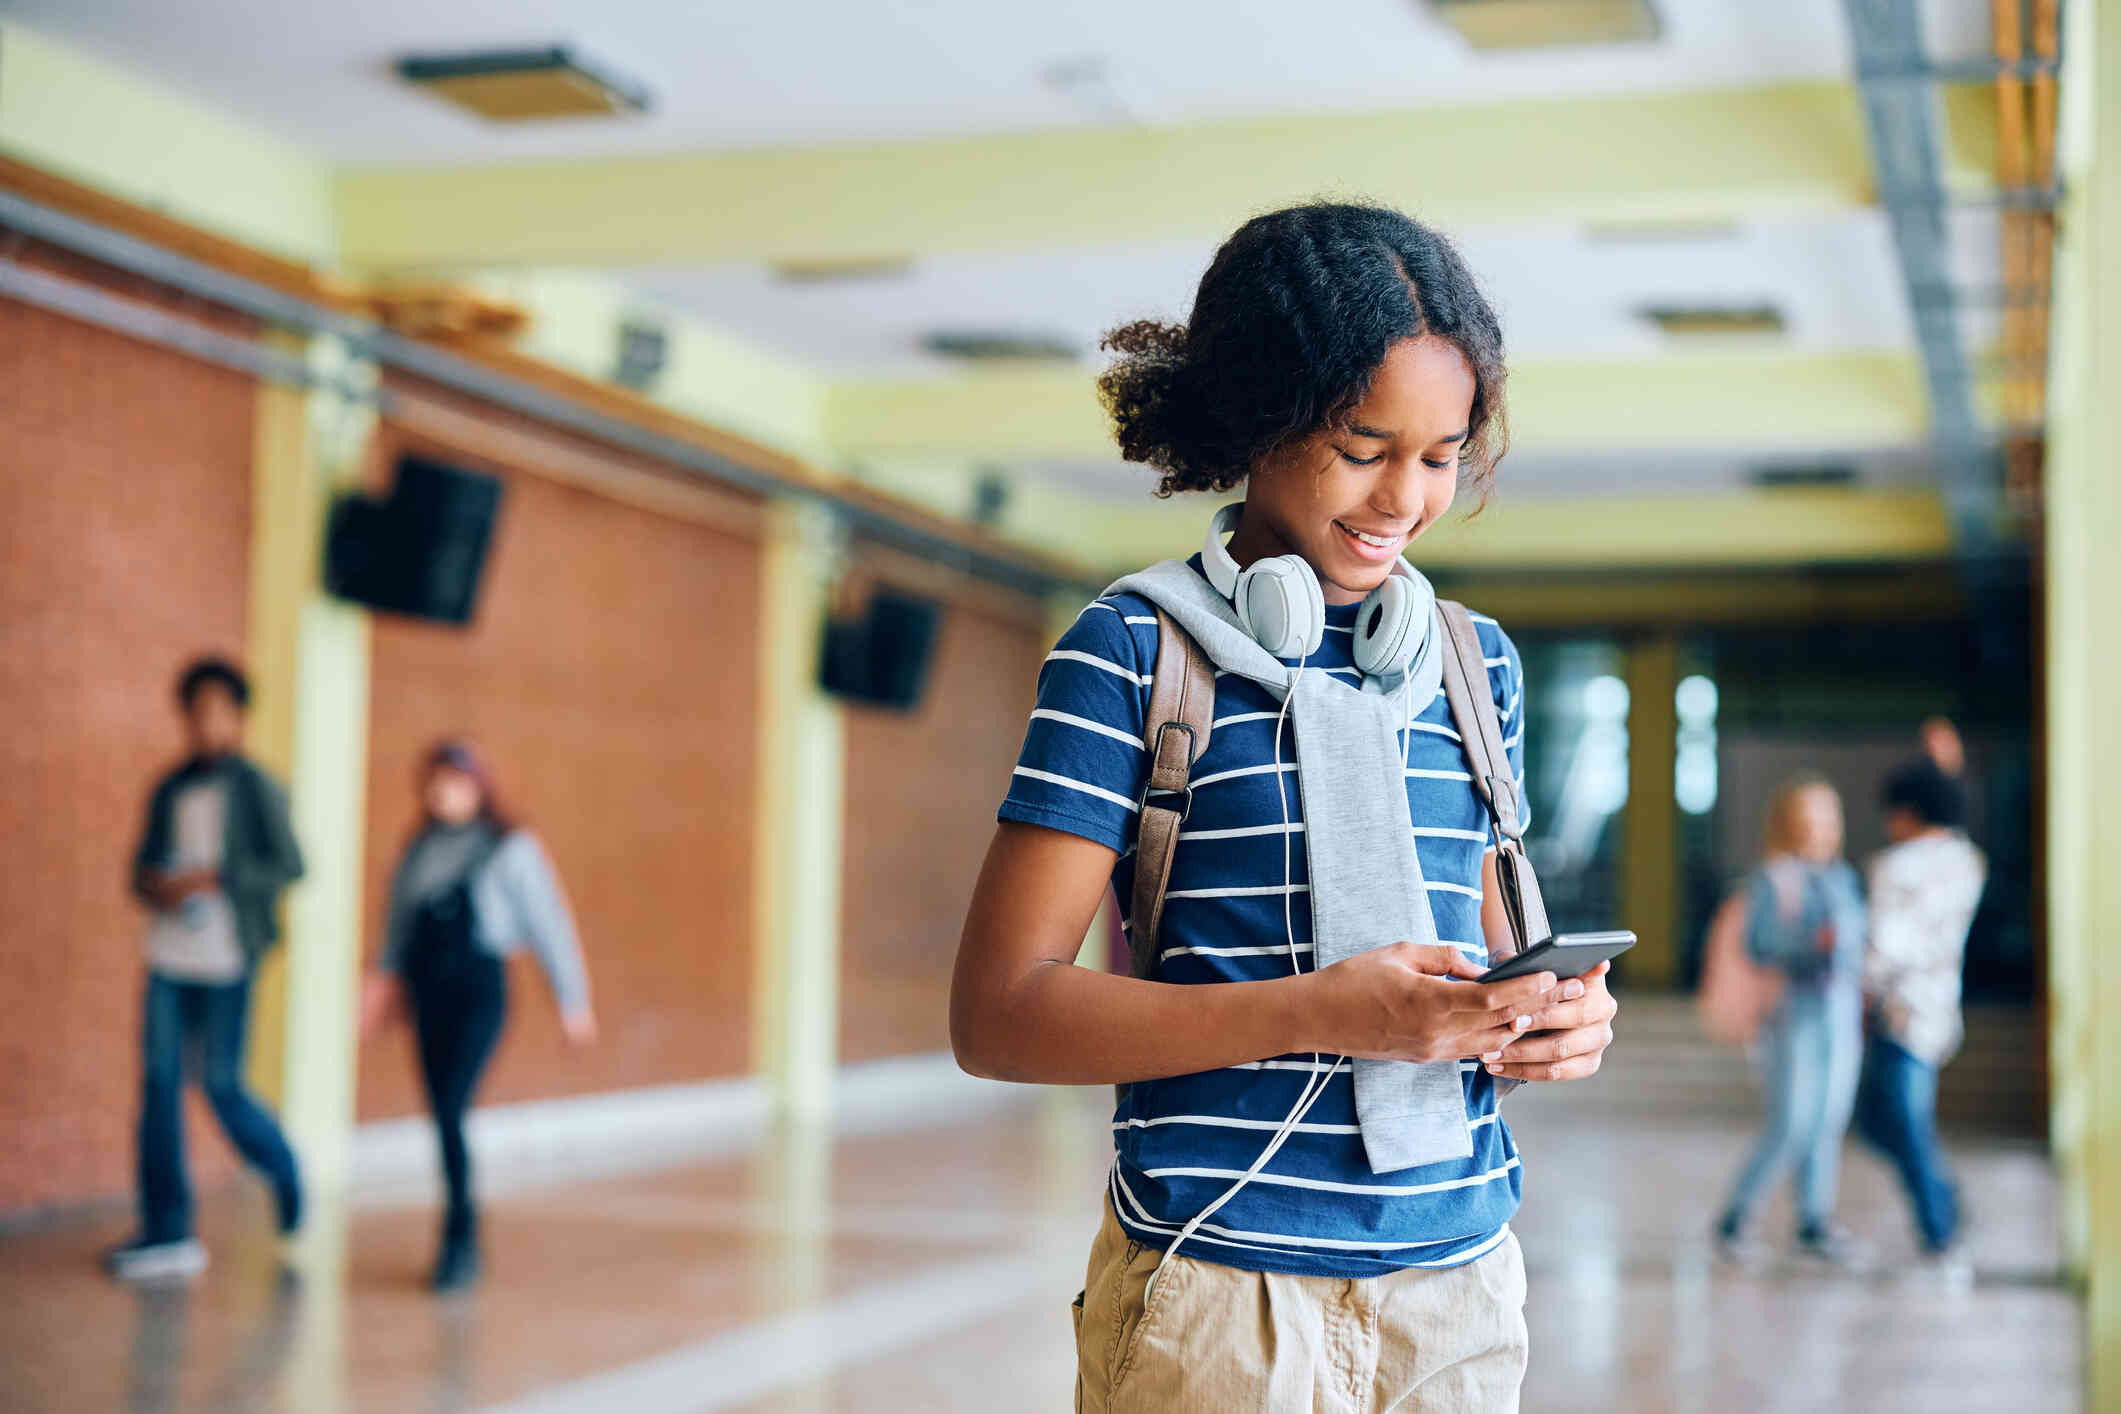 A teen girl in a striped shirt and backpack stands in the school hallways and smiles down at the cellphone in her hand.